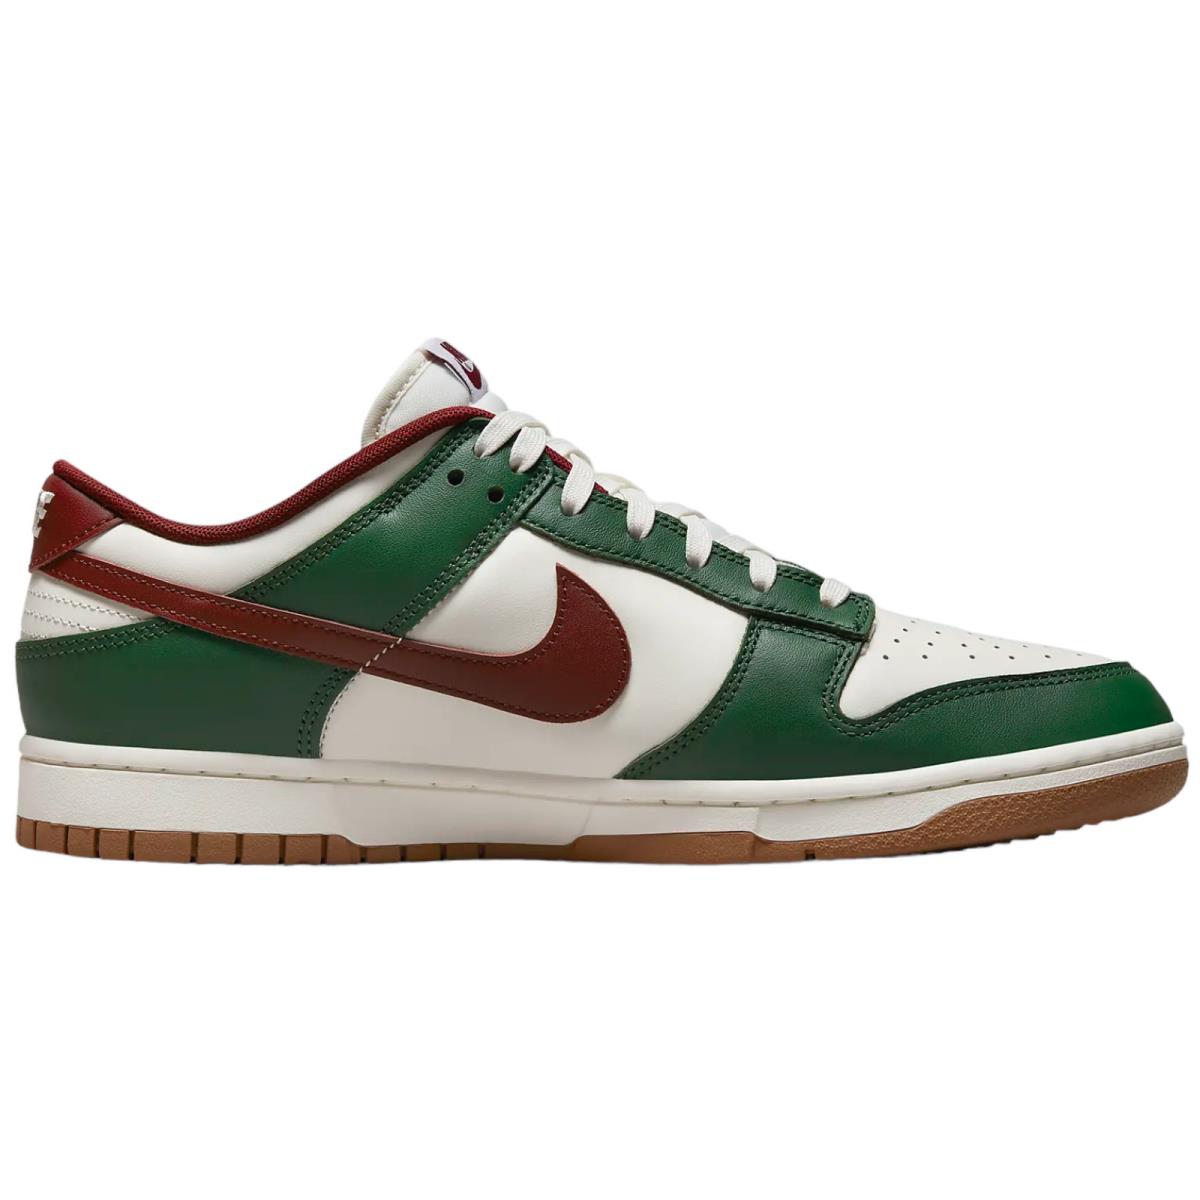 Nike Dunk Low Retro Men`s Casual Shoes All Colors US Sizes 7-14 Sail/White/Sail/Team Red